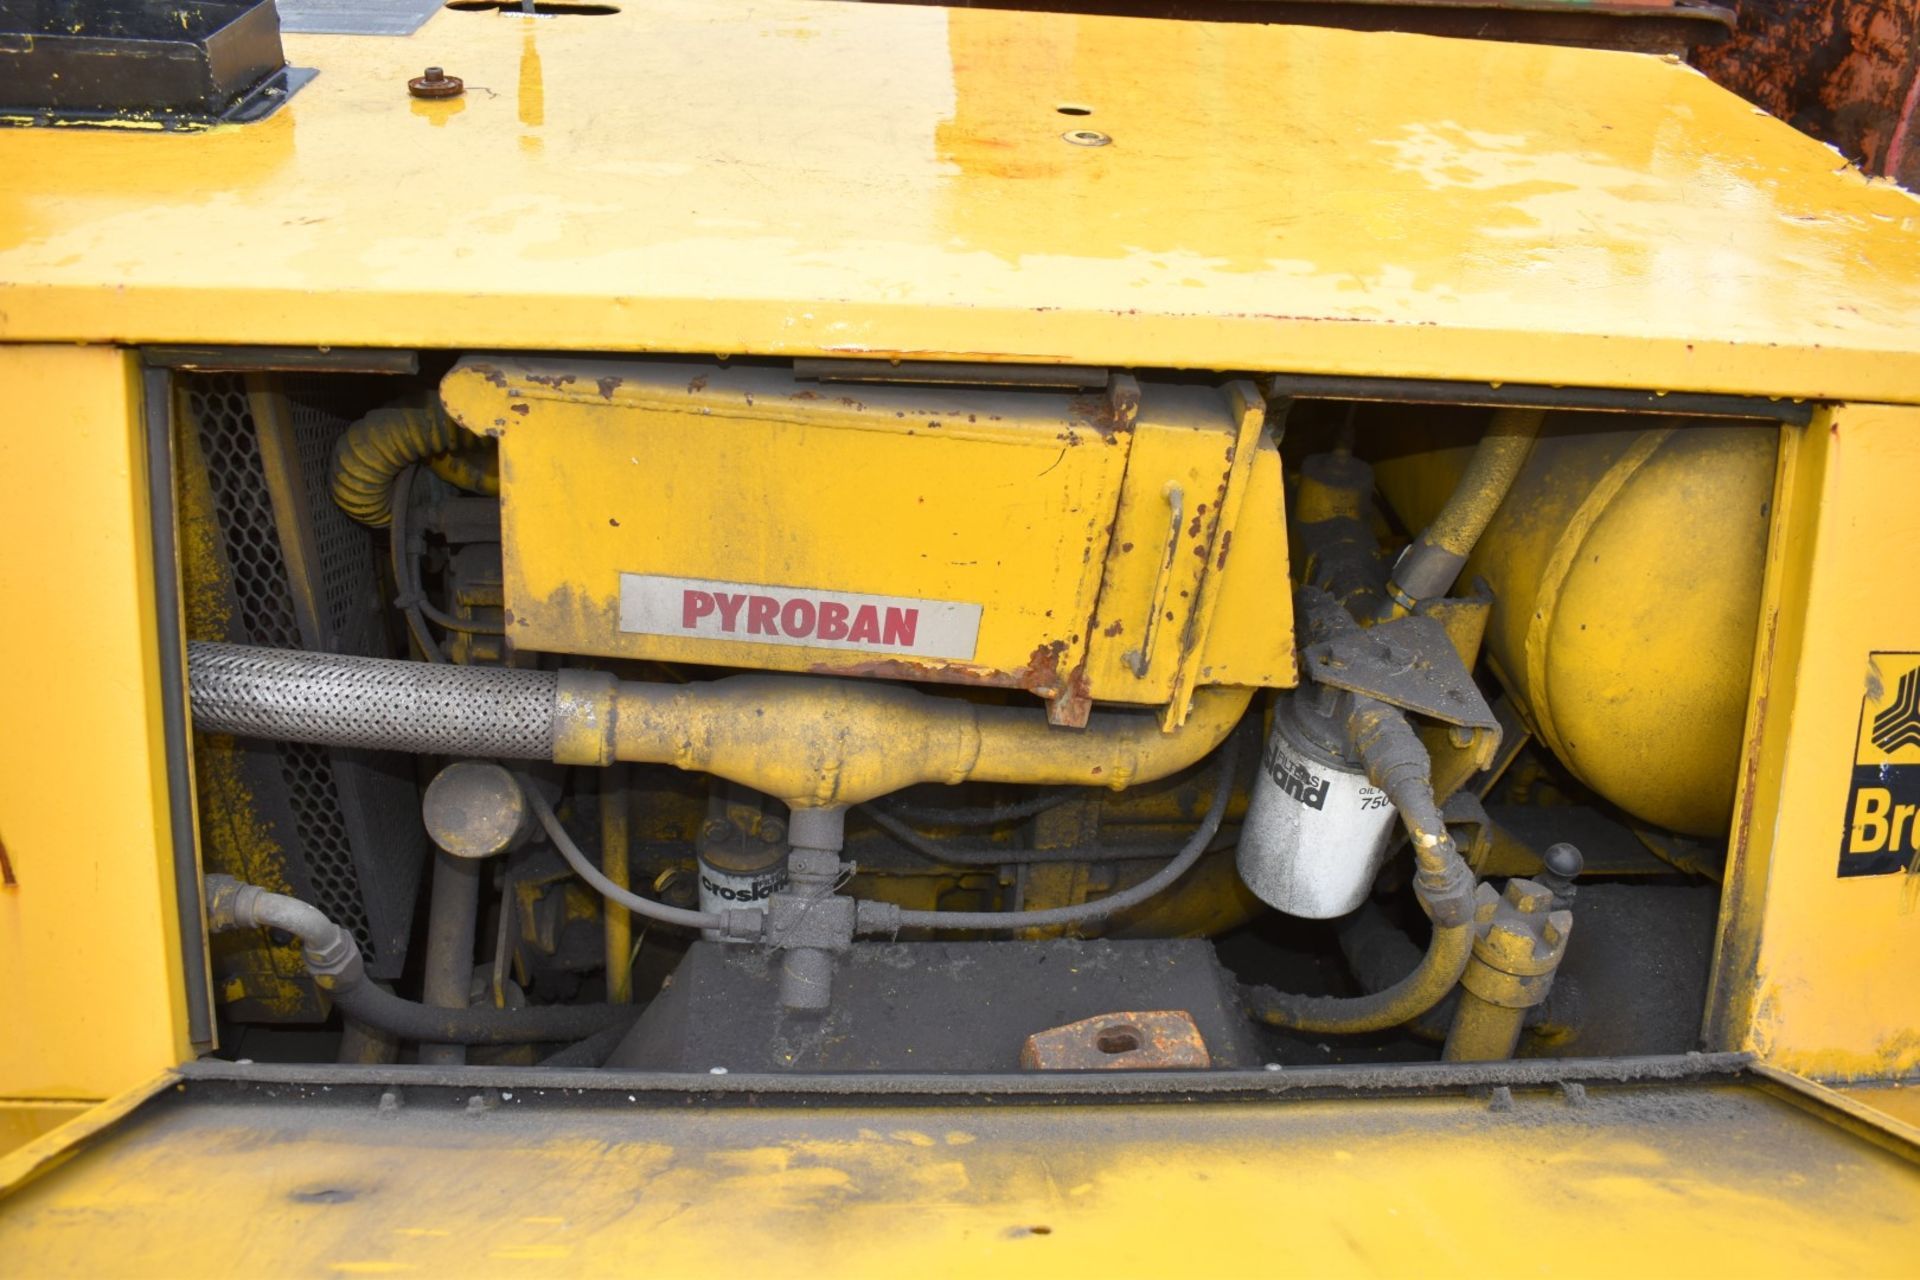 1 x Compair BroomWade CA1 Compressor With Pyroban Diesel Engine - CL547 - No VAT on the Hammer - - Image 10 of 12